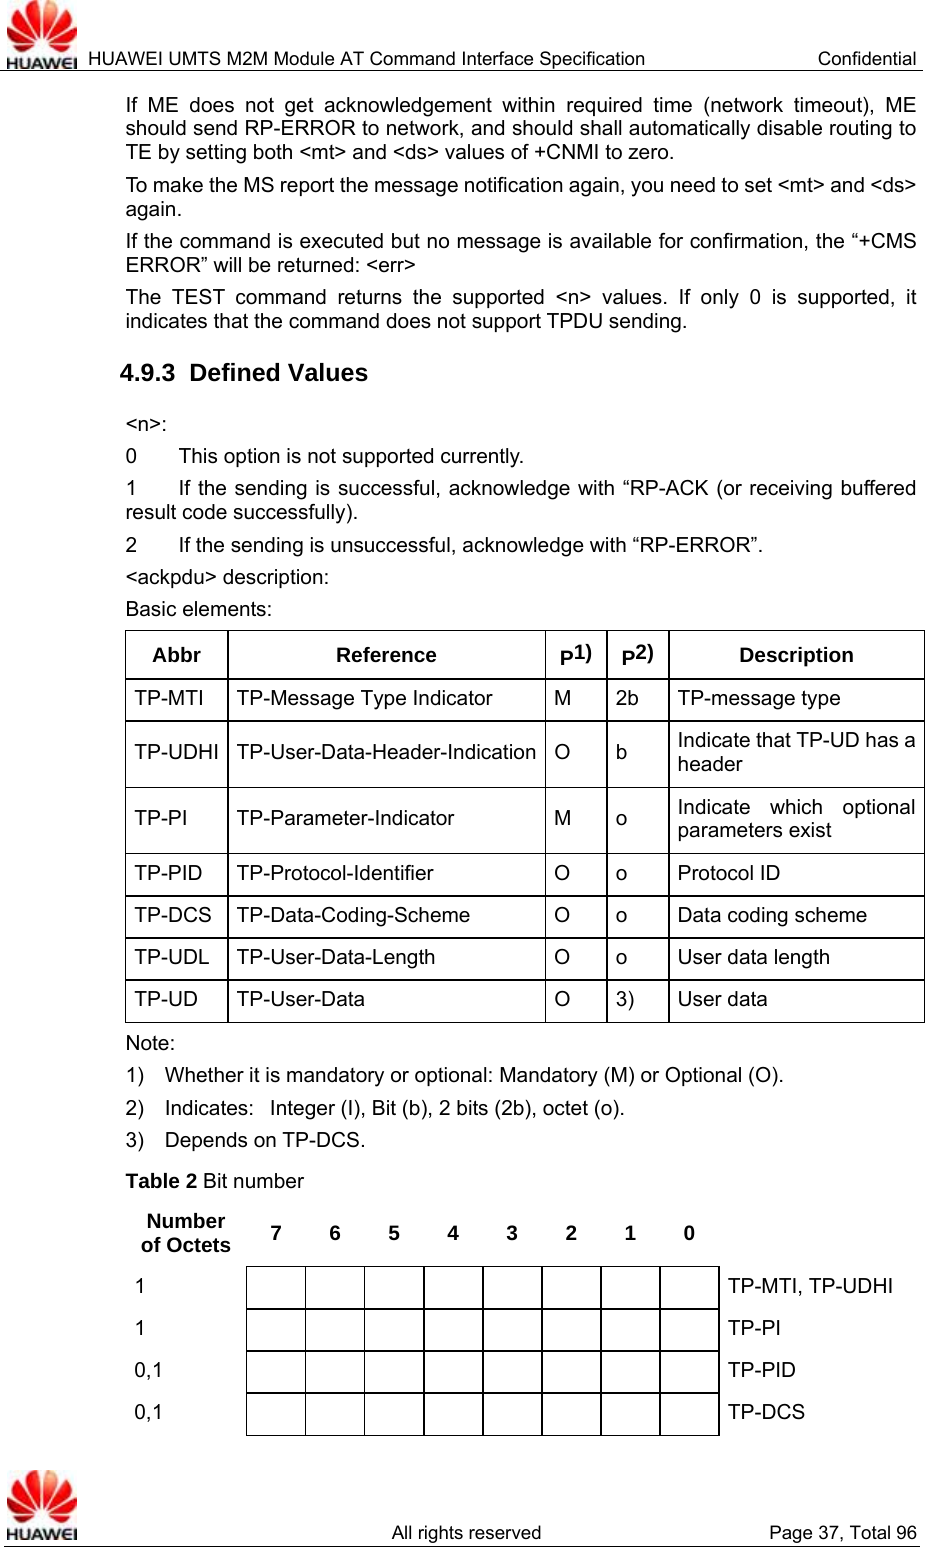  HUAWEI UMTS M2M Module AT Command Interface Specification  Confidential   All rights reserved  Page 37, Total 96 If ME does not get acknowledgement within required time (network timeout), ME should send RP-ERROR to network, and should shall automatically disable routing to TE by setting both &lt;mt&gt; and &lt;ds&gt; values of +CNMI to zero. To make the MS report the message notification again, you need to set &lt;mt&gt; and &lt;ds&gt; again.  If the command is executed but no message is available for confirmation, the “+CMS ERROR” will be returned: &lt;err&gt; The TEST command returns the supported &lt;n&gt; values. If only 0 is supported, it indicates that the command does not support TPDU sending.   4.9.3  Defined Values &lt;n&gt;:  0    This option is not supported currently.  1        If the sending is successful, acknowledge with “RP-ACK (or receiving buffered result code successfully).   2        If the sending is unsuccessful, acknowledge with “RP-ERROR”.   &lt;ackpdu&gt; description:   Basic elements:   Abbr Reference P1) P2) Description TP-MTI TP-Message Type Indicator M 2b TP-message type TP-UDHI TP-User-Data-Header-Indication O b  Indicate that TP-UD has a header TP-PI TP-Parameter-Indicator  M o Indicate which optional parameters exist TP-PID TP-Protocol-Identifier O o Protocol ID TP-DCS TP-Data-Coding-Scheme  O  o  Data coding scheme TP-UDL TP-User-Data-Length  O  o  User data length TP-UD TP-User-Data  O 3)  User data Note: 1)    Whether it is mandatory or optional: Mandatory (M) or Optional (O). 2)    Indicates:   Integer (I), Bit (b), 2 bits (2b), octet (o). 3)  Depends on TP-DCS. Table 2 Bit number Number of Octets  7 6 5 4 3 2 1 0   1          TP-MTI, TP-UDHI 1          TP-PI 0,1          TP-PID 0,1          TP-DCS 